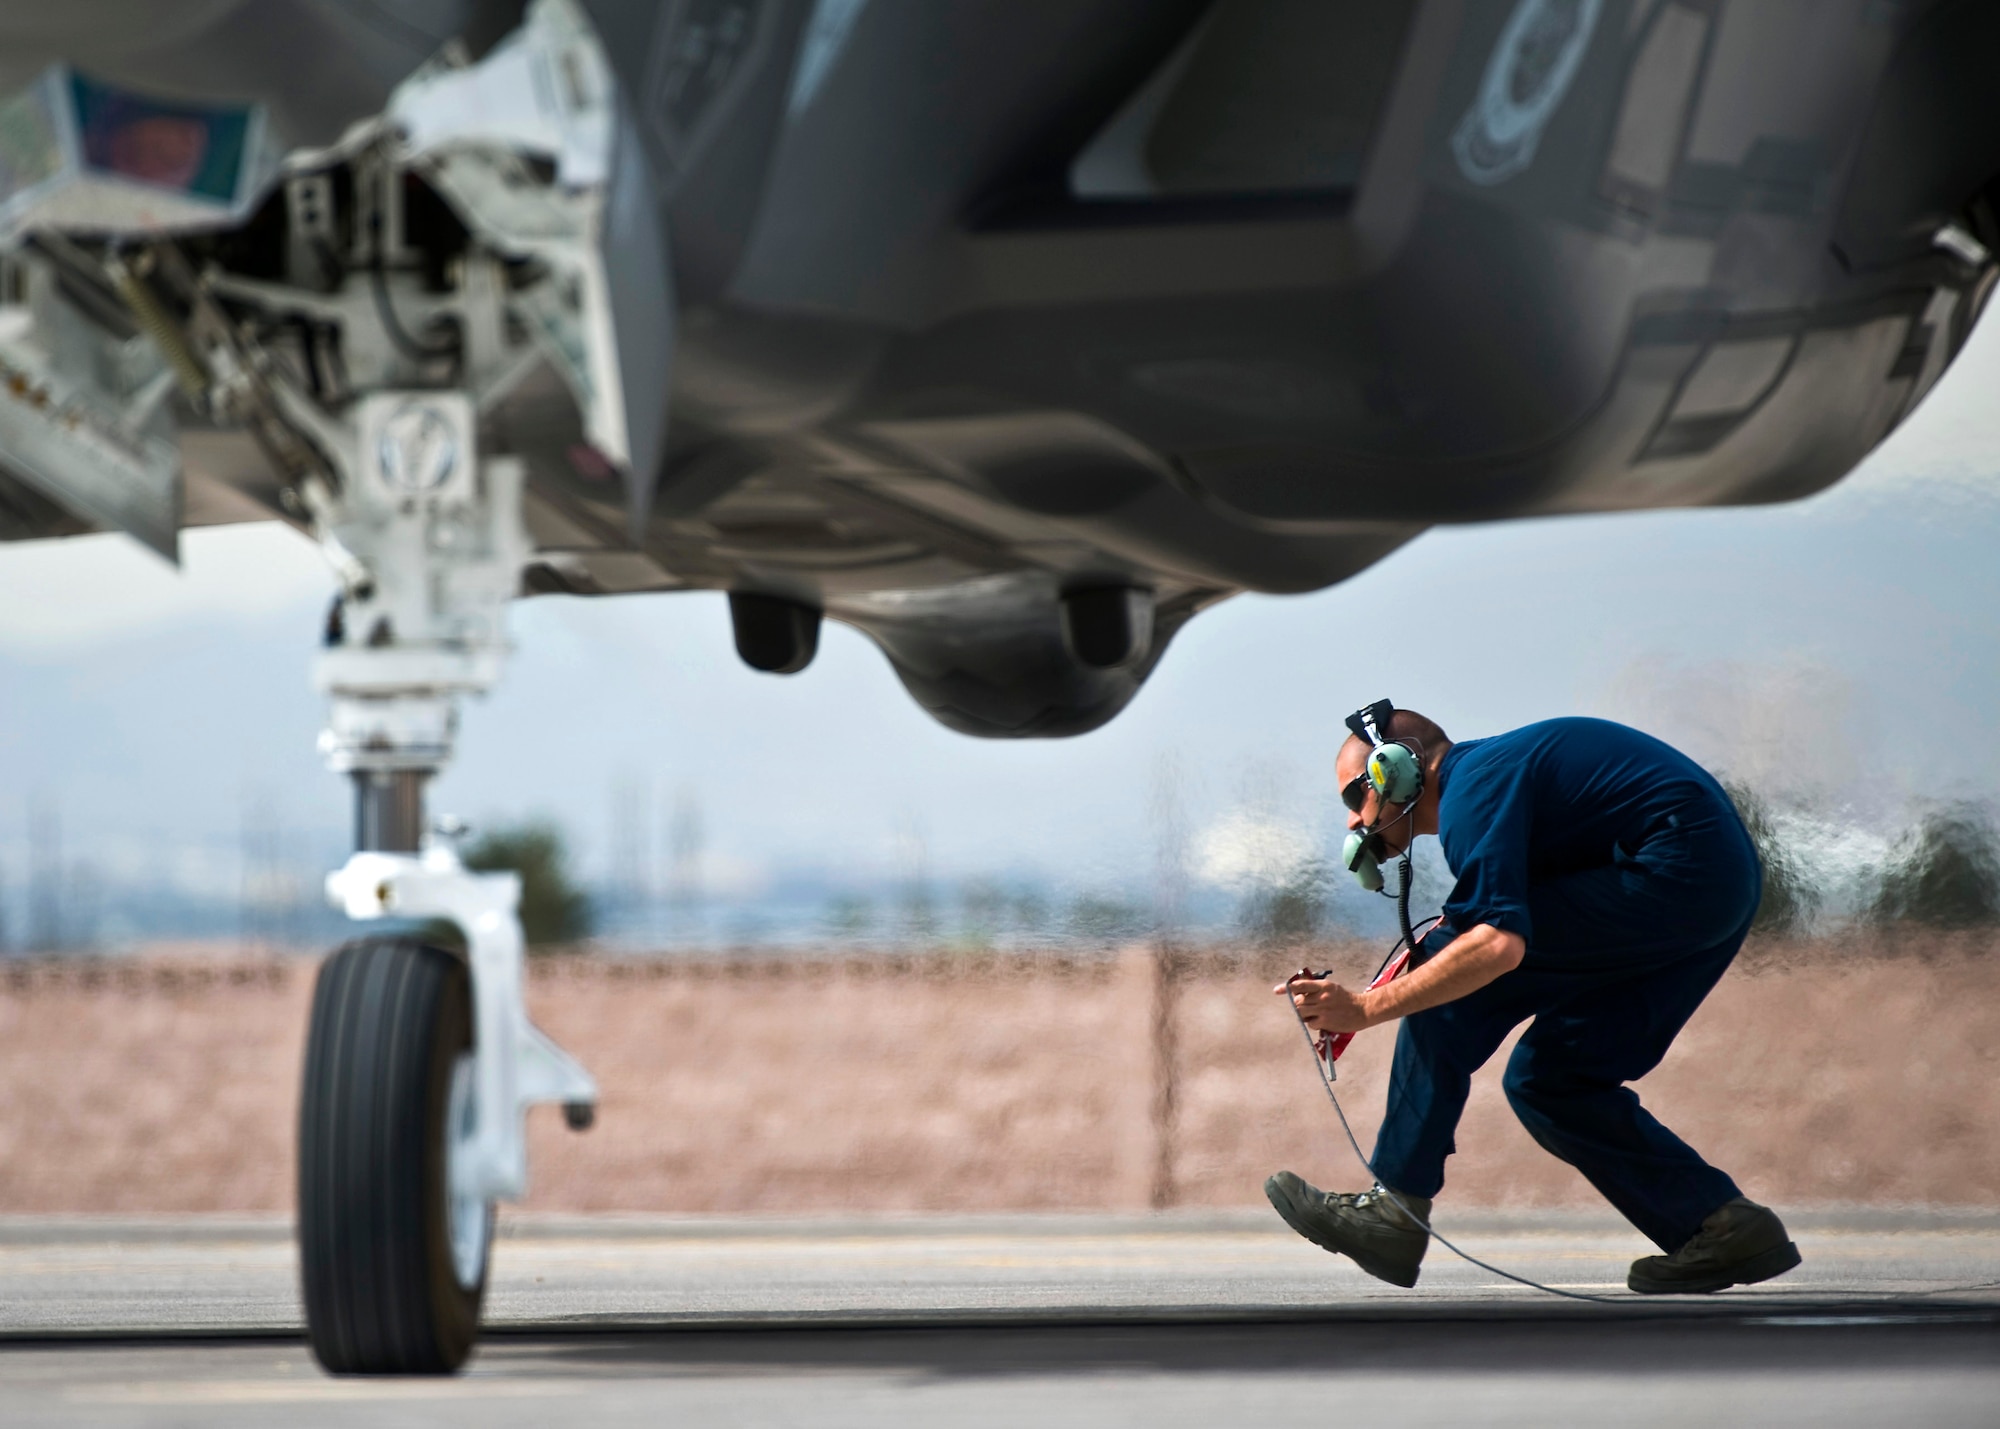 U.S. Air Force Senior Airman Alexander Orchard, 57th Aircraft Maintenance Squadron crew chief, crouches underneath the exhaust of an F-35A Lightning II before a training mission April 4, 2013, at Nellis Air Force Base, Nev. The F-35A is assigned to the 422nd Test and Evaluation Squadron and maintained by the 57th AMXS Lightning Aircraft Maintenance Unit. (U.S. Air Force photo/Senior Airman Brett Clashman)